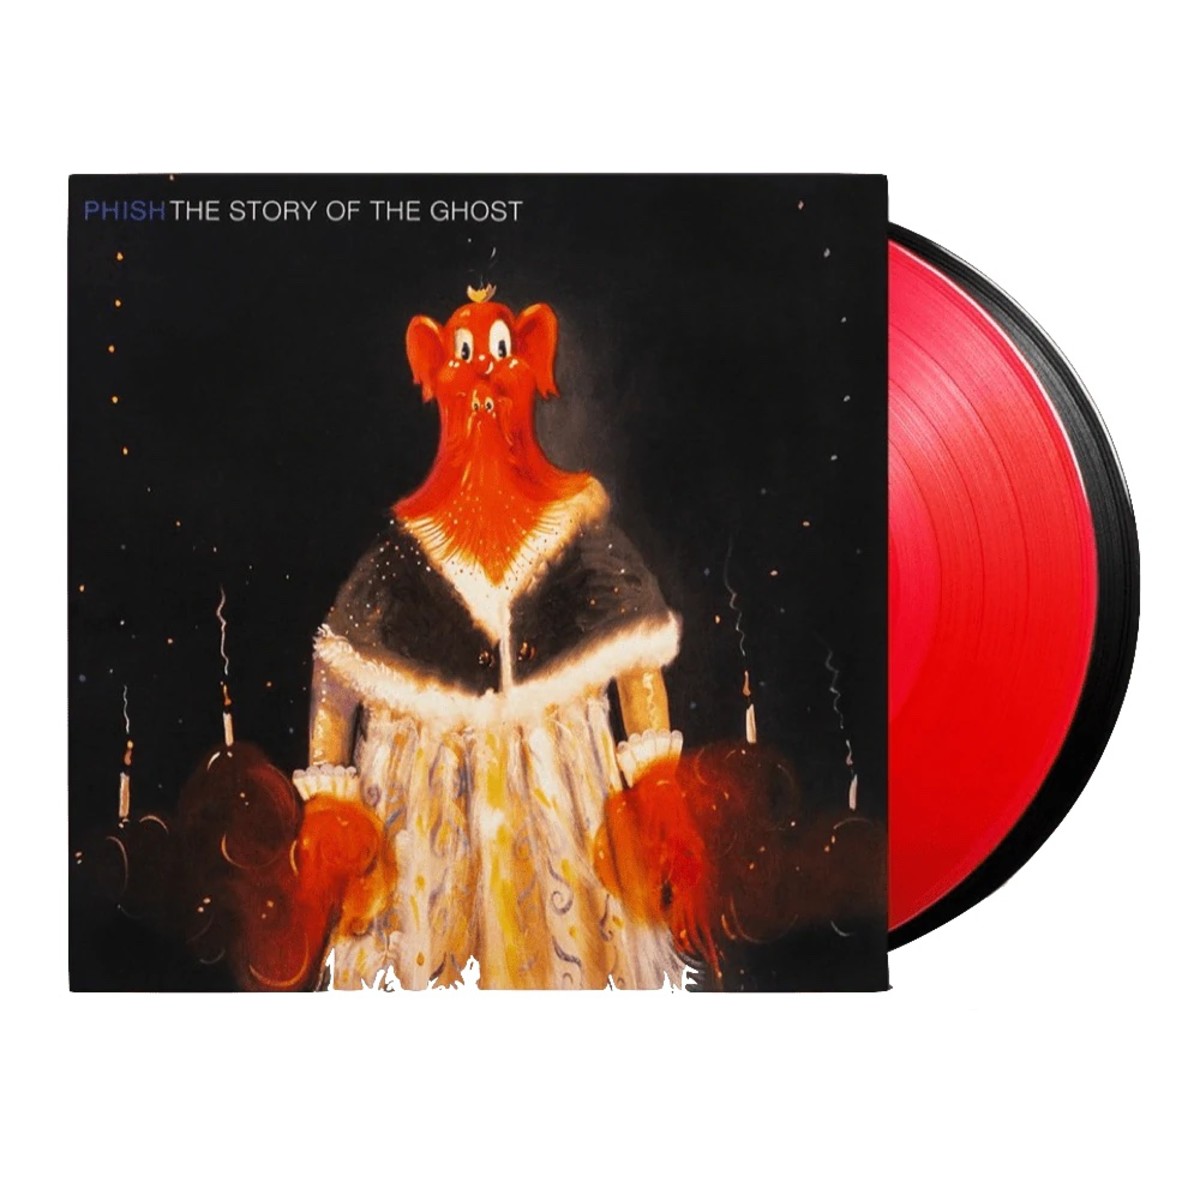 Phish's 1998 "Story of the Ghost" is often ranked among the band's best albums. It was reissued in 2020 on a red and black vinyl set.